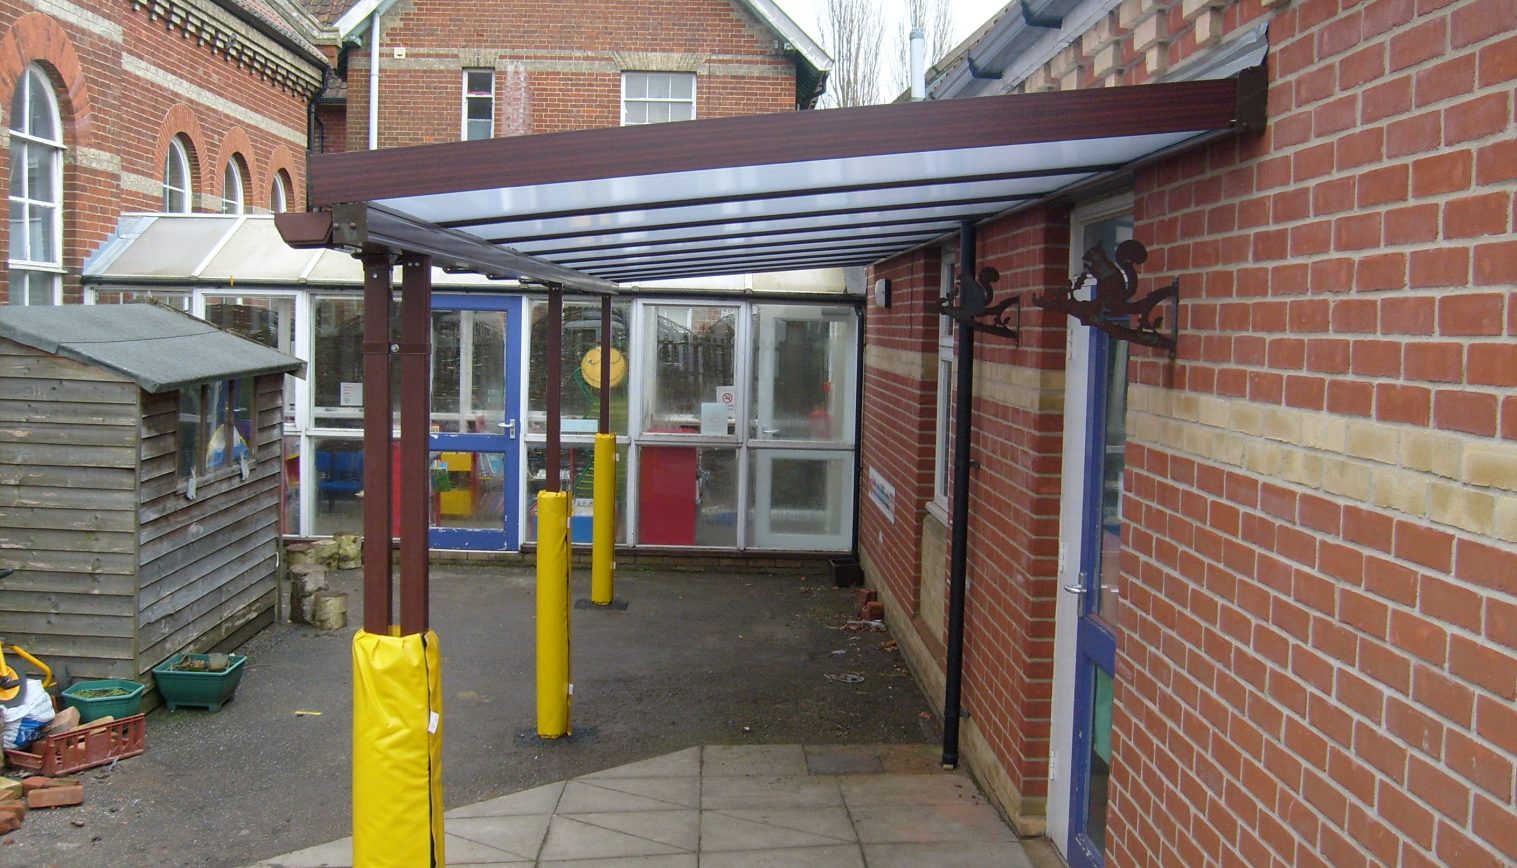 Great Finborough CEVC School – Wall Mounted Canopy